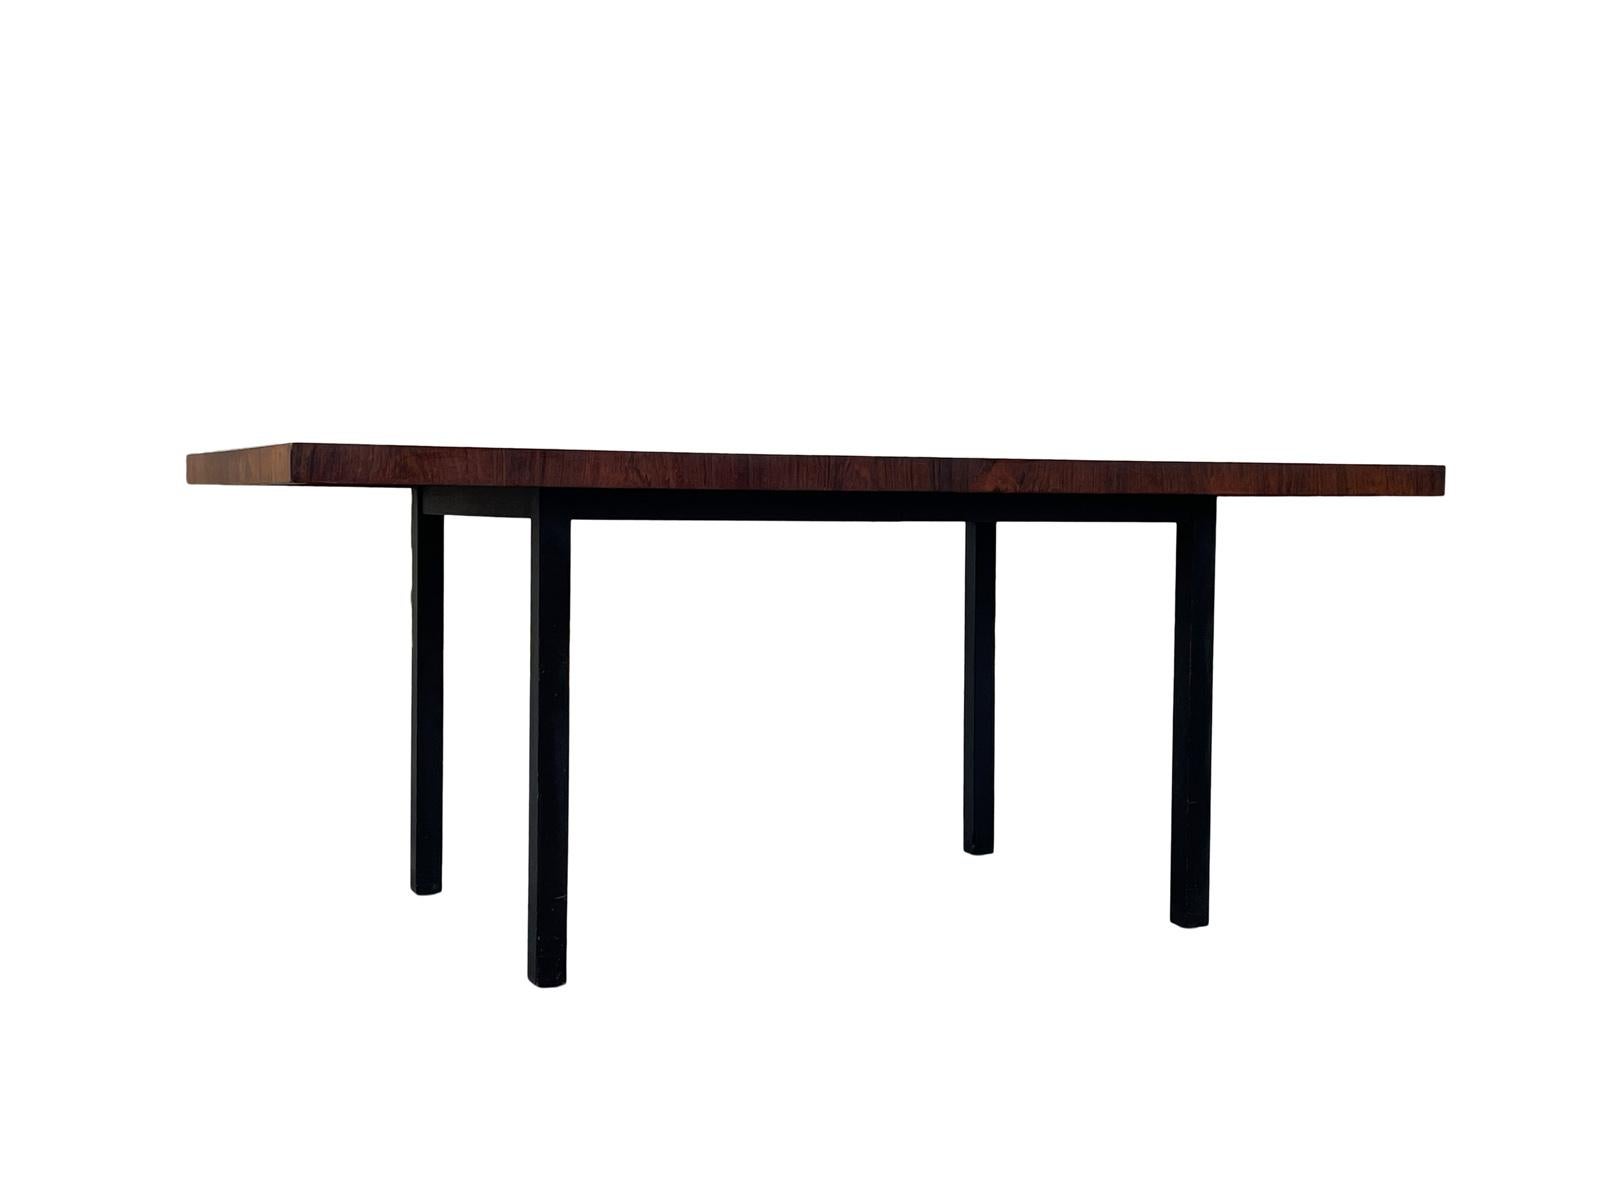 American 1970s Milo Baughman Rosewood Walnut Dining Table for Directional